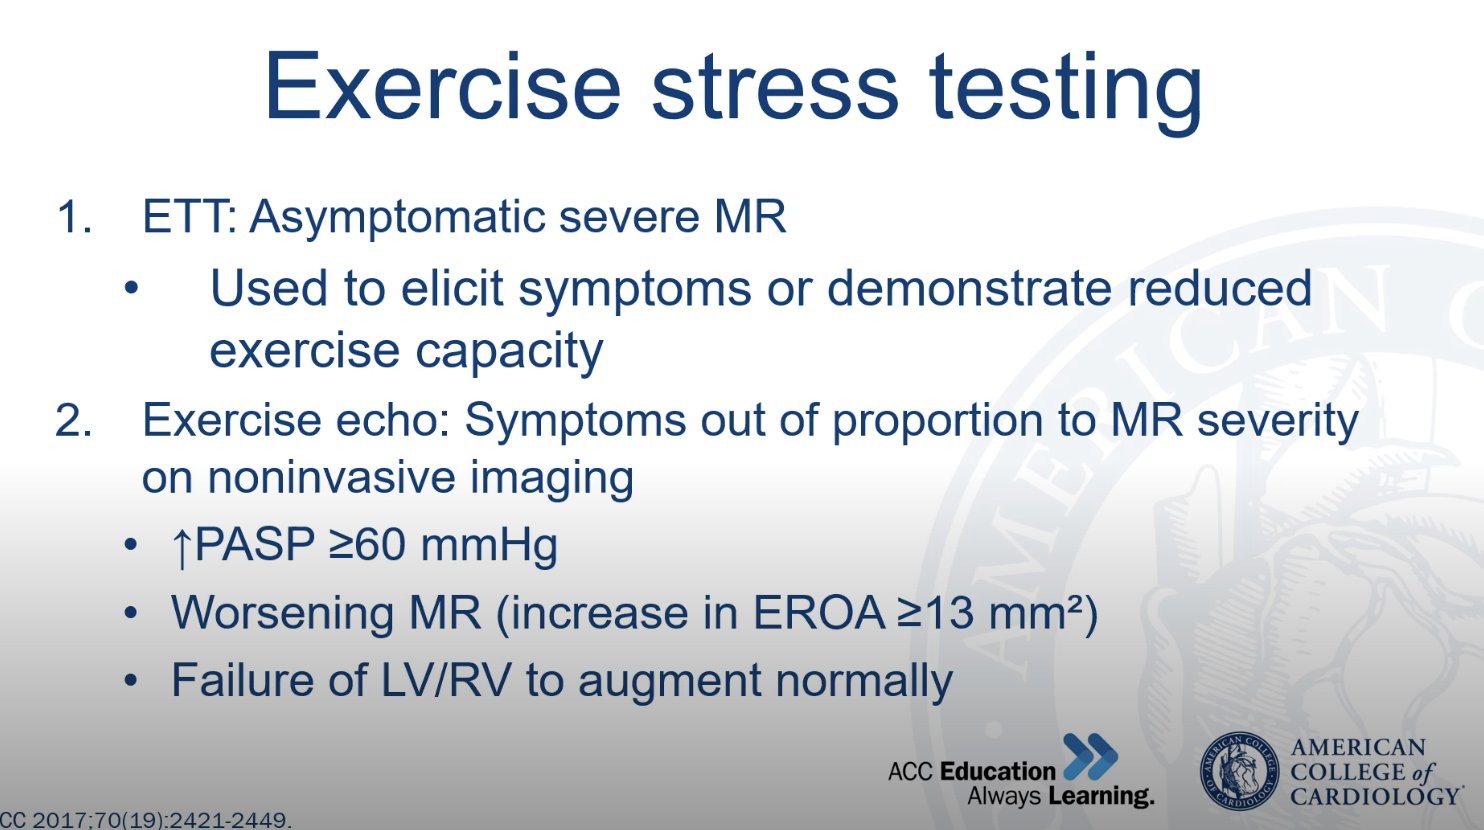 Indications for exercise stress testing in MR